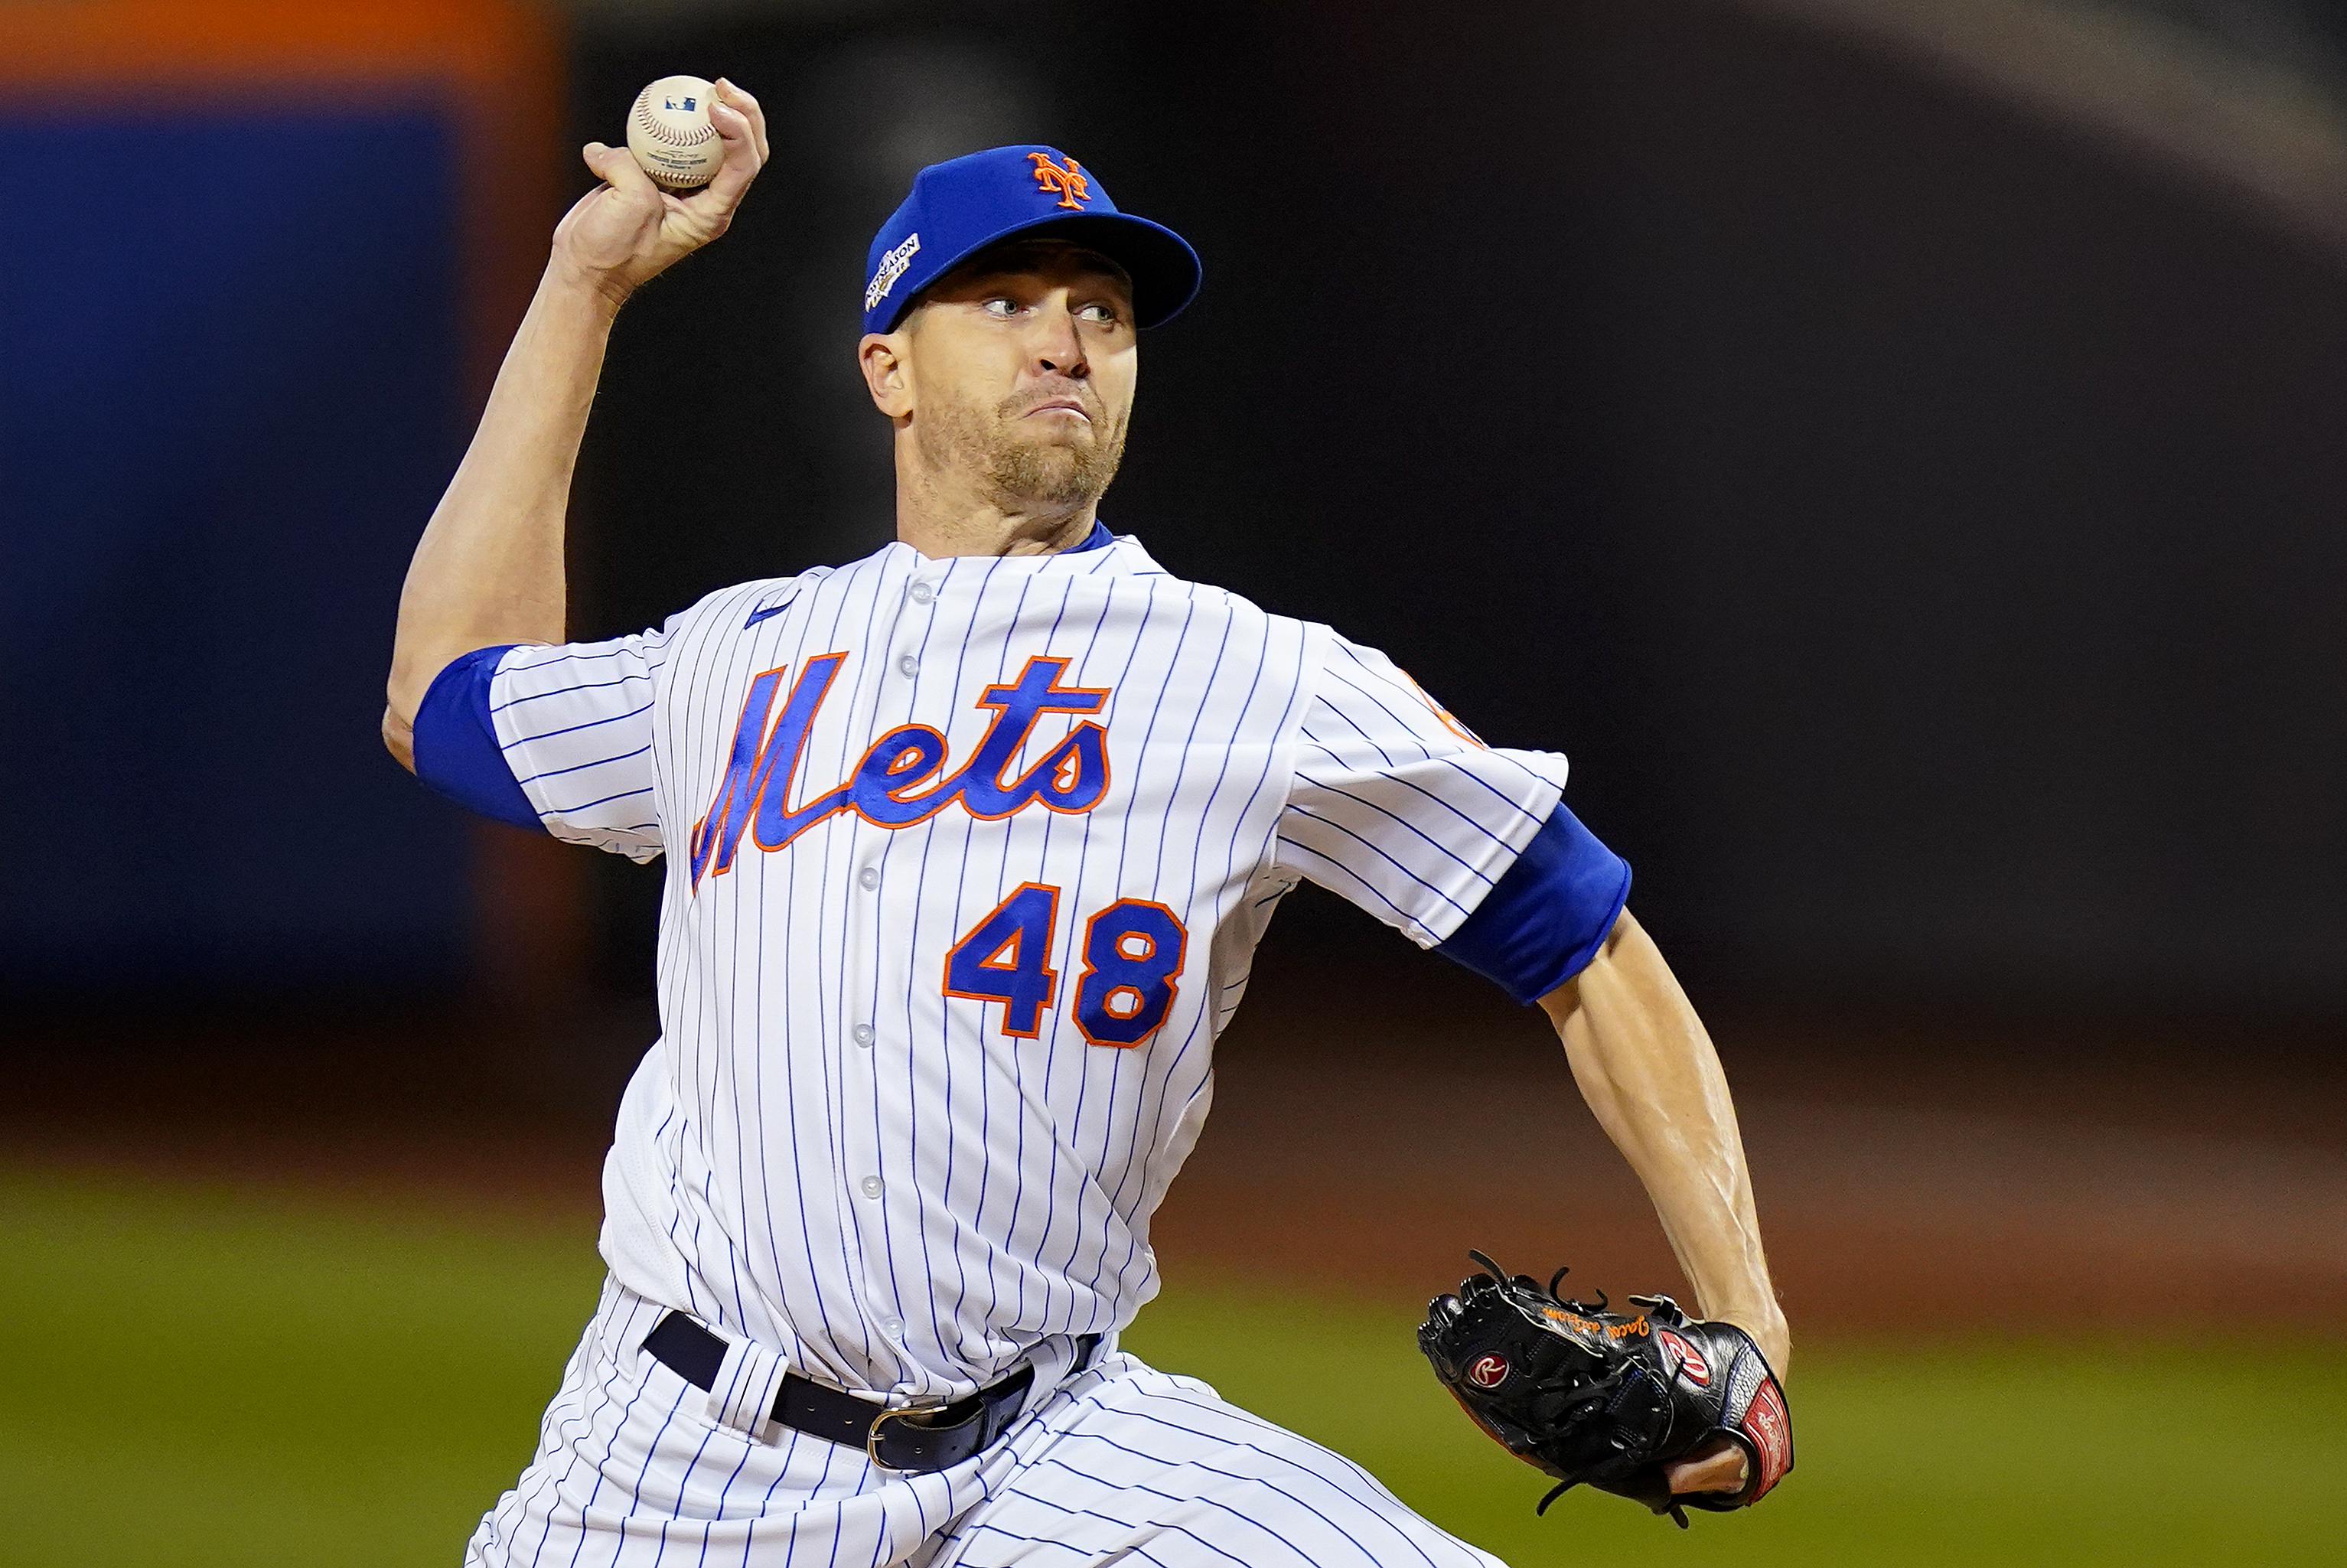 Mets injury update: Jacob deGrom throws again, and his son is doing better  - Amazin' Avenue